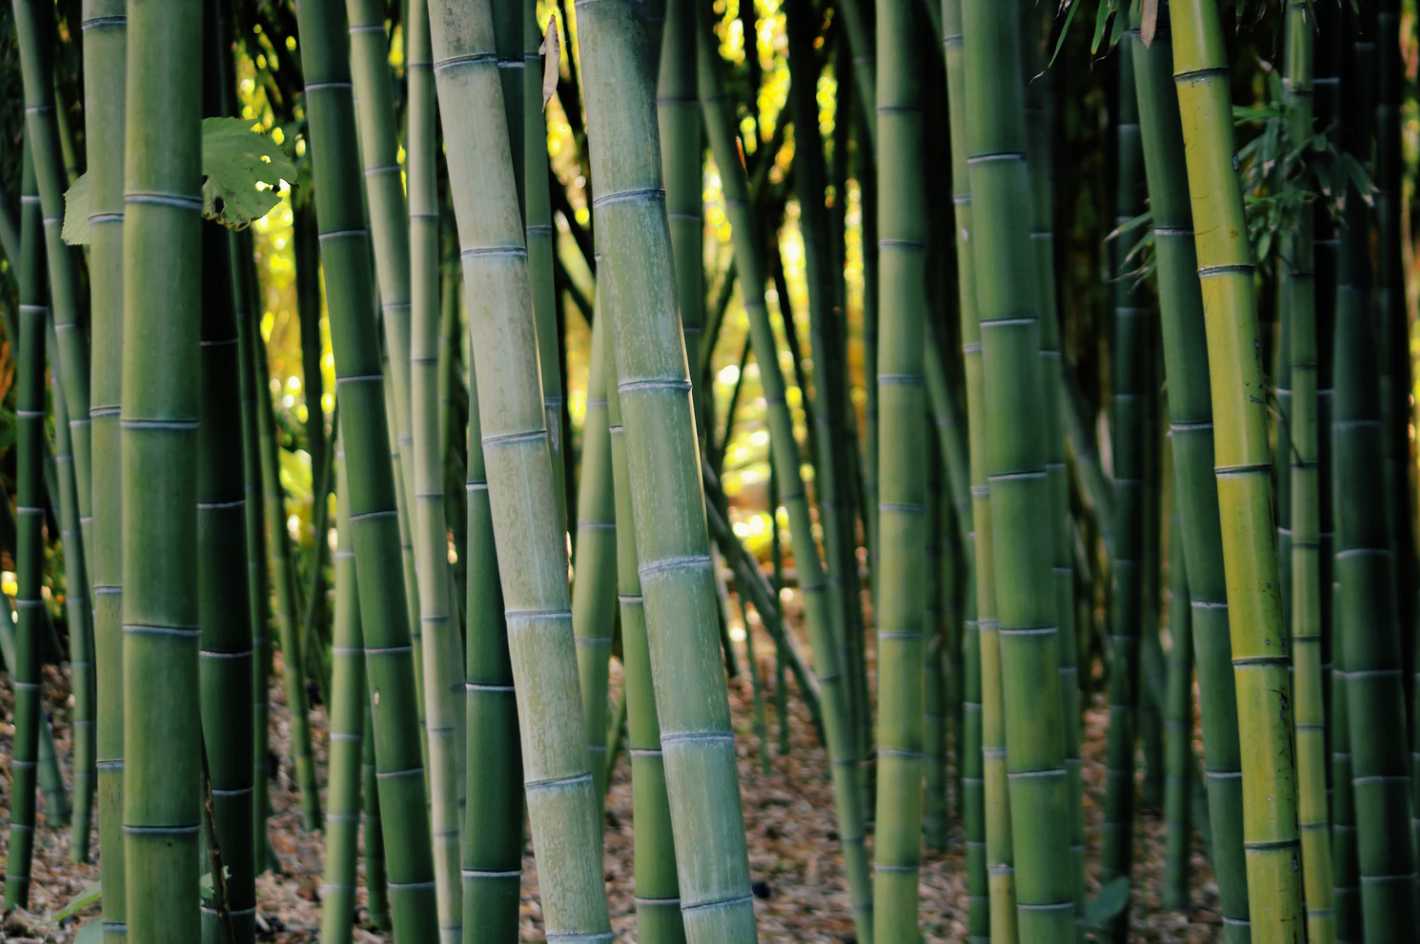 Bamboo farming in the US